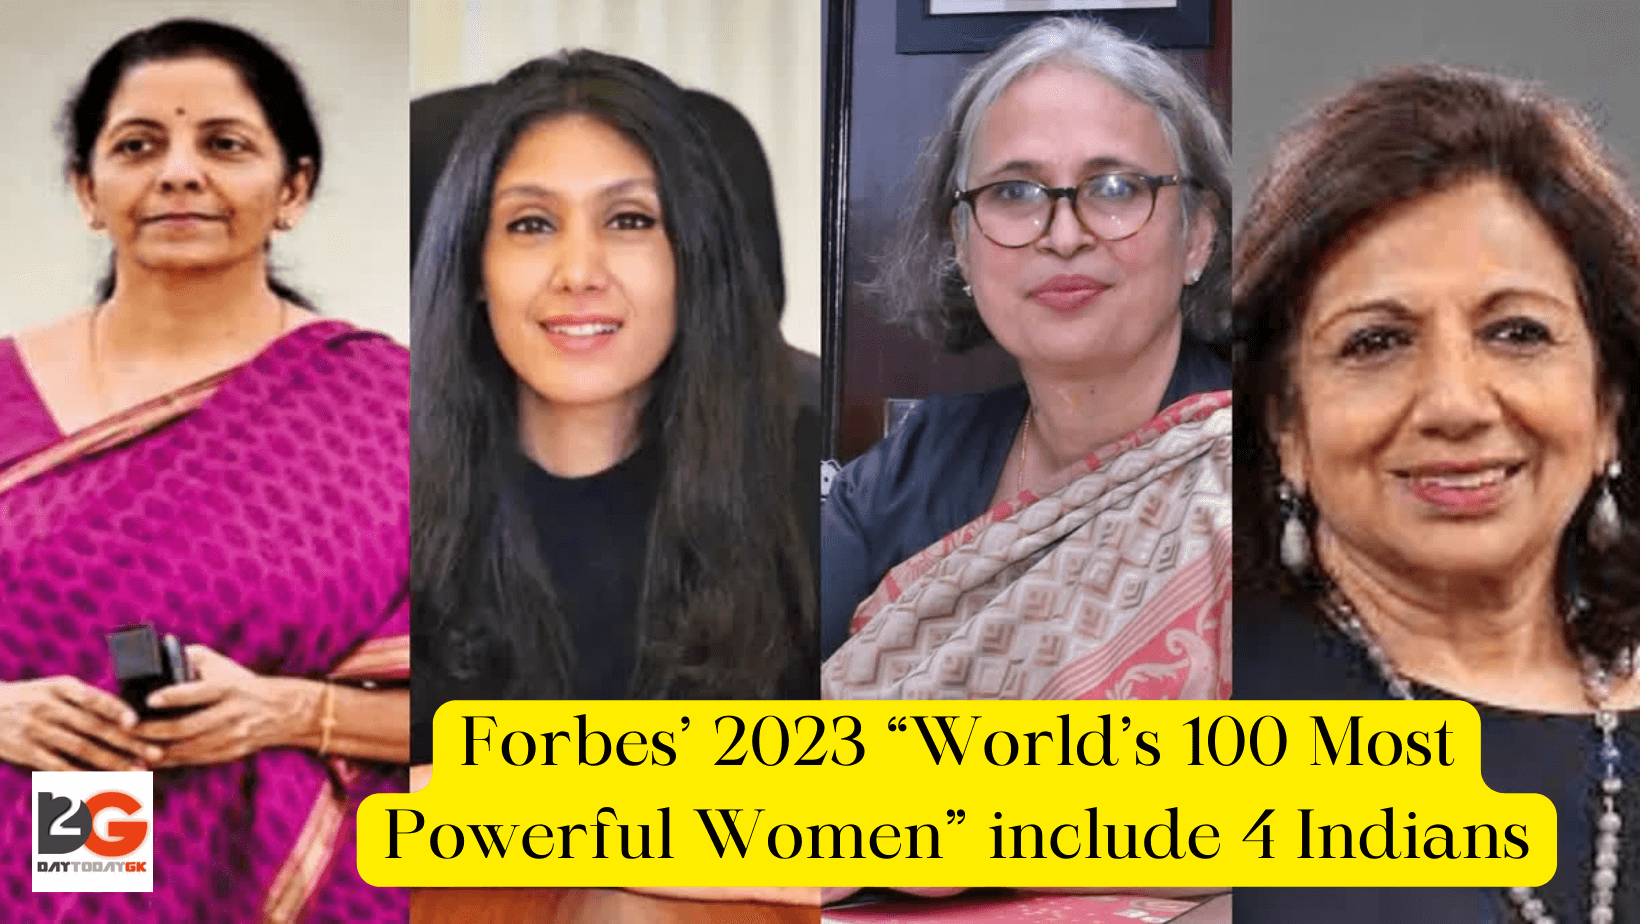 Forbes’ 2023 “World’s 100 Most Powerful Women” include Nirmala Sitharaman and three other Indians